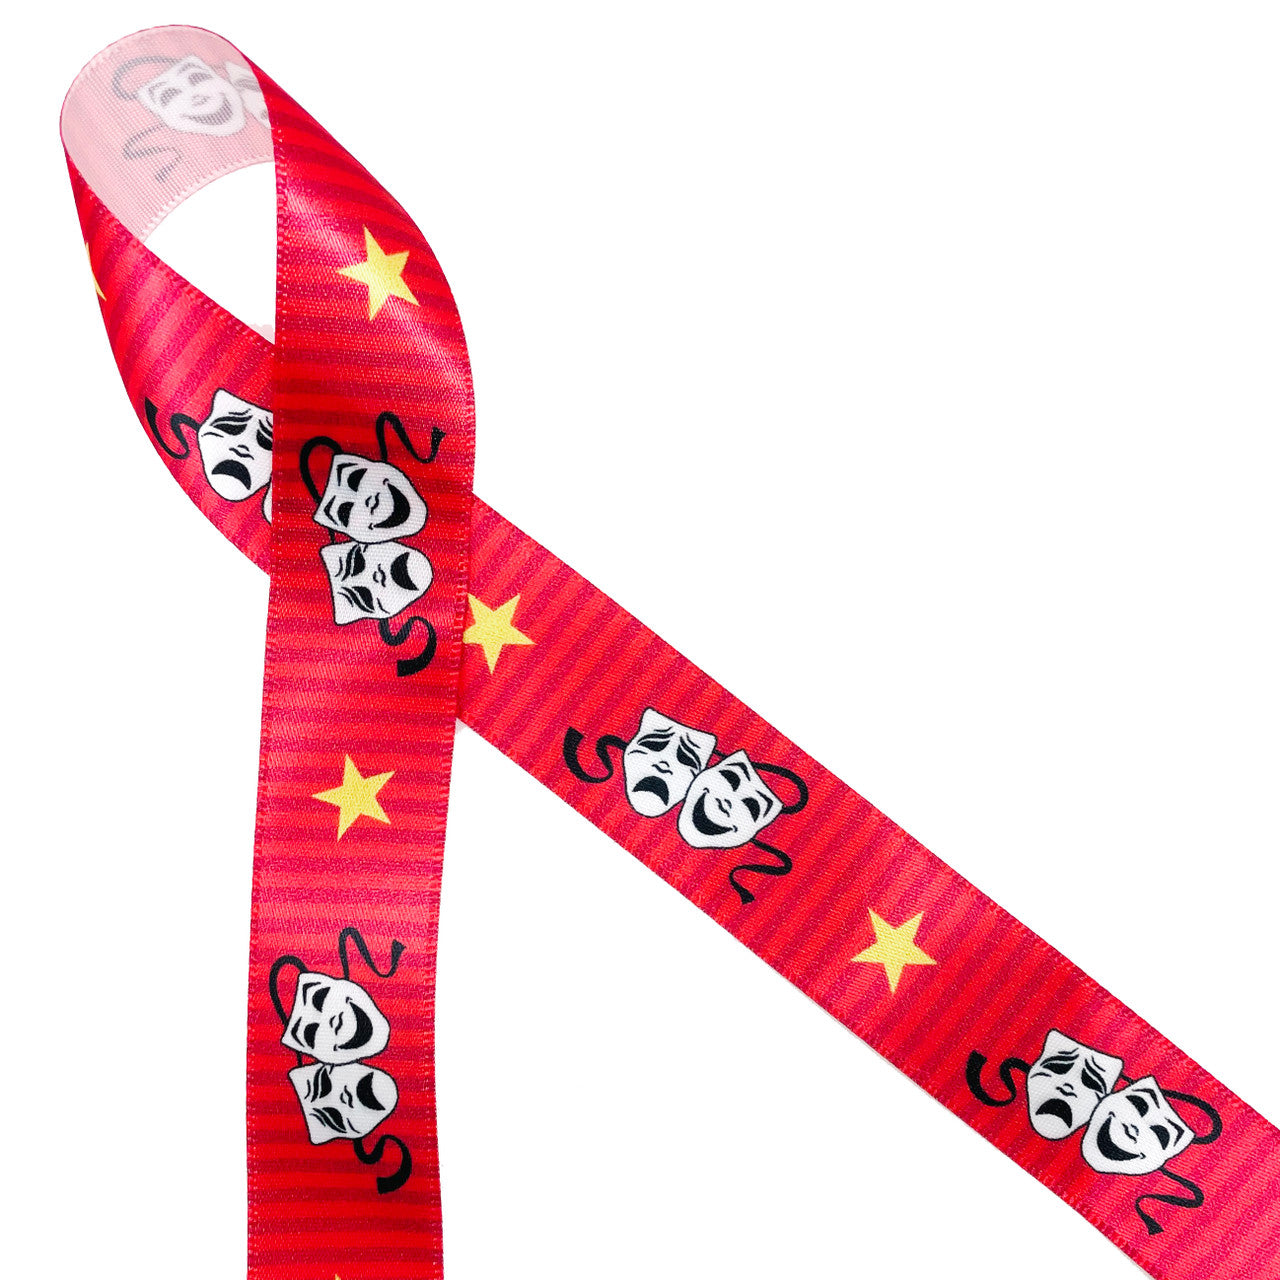 Theater themed ribbon printed on white with red on red stripes and the masks of comedy and tragedy with a gold star! Any budding actor would love a gift tied with this unique ribbon! Designed and printed in the USA